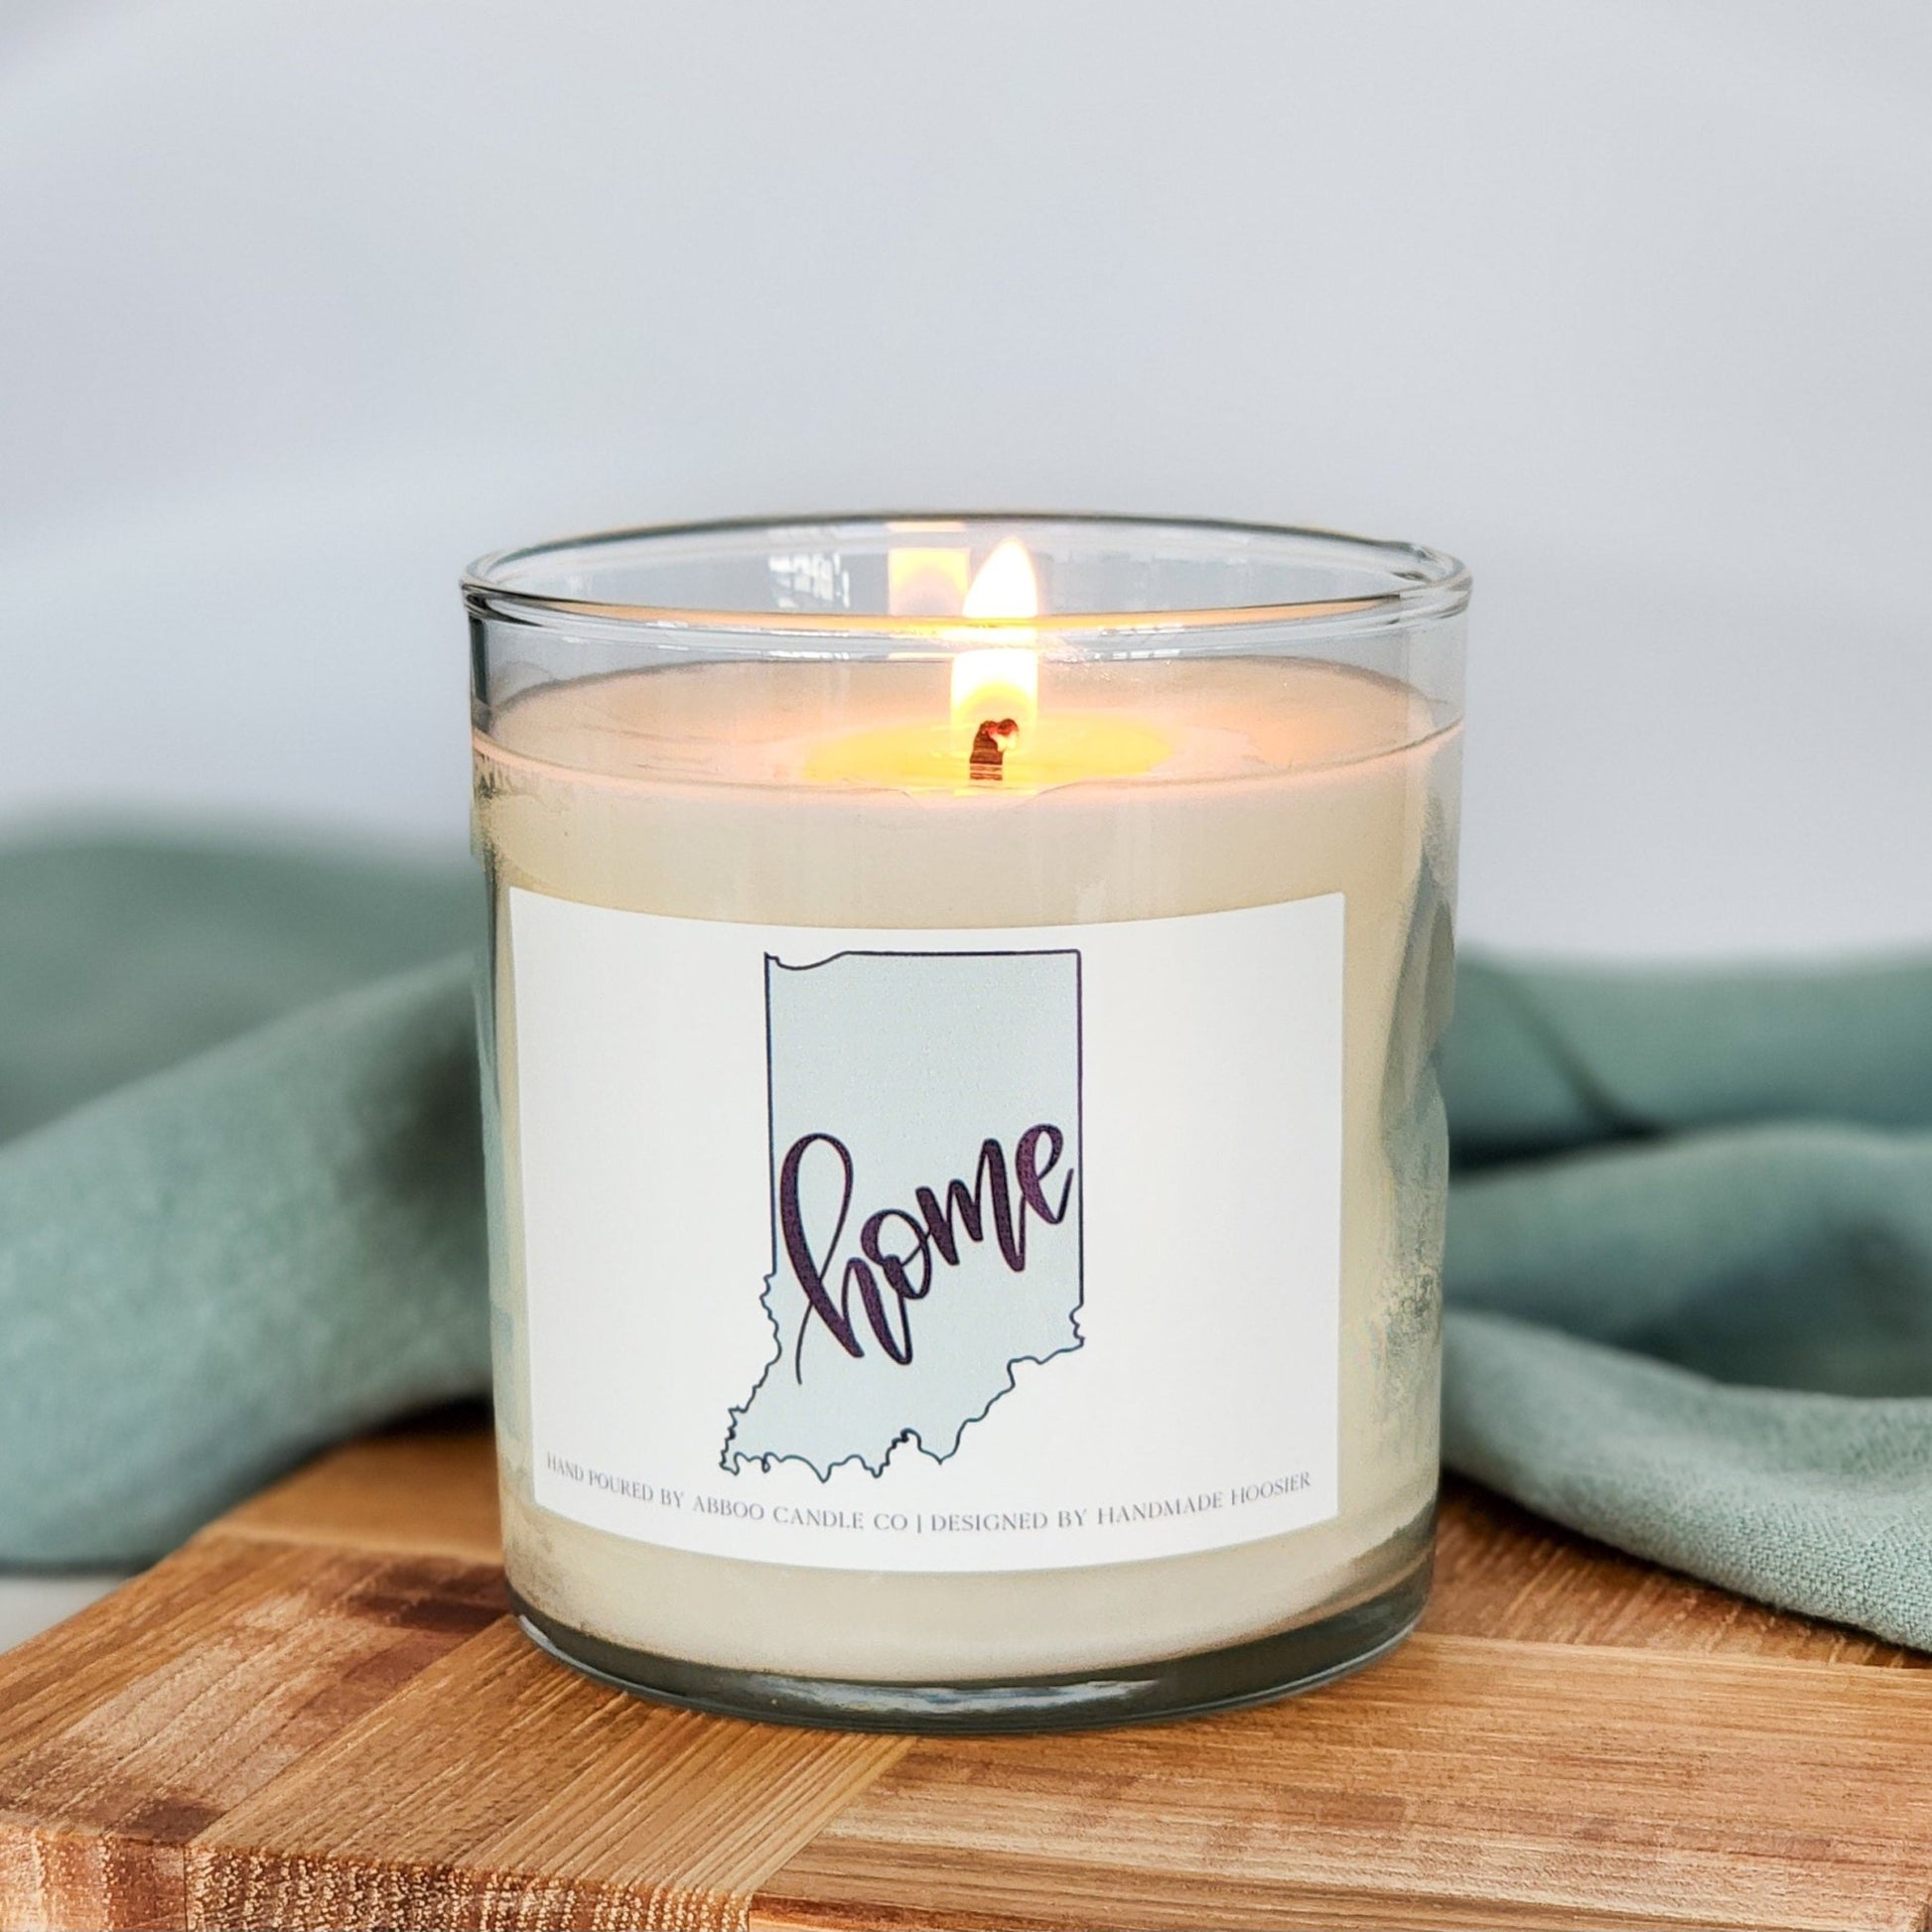 Indiana Home Soy Tumbler Candle - Abboo Candle Co